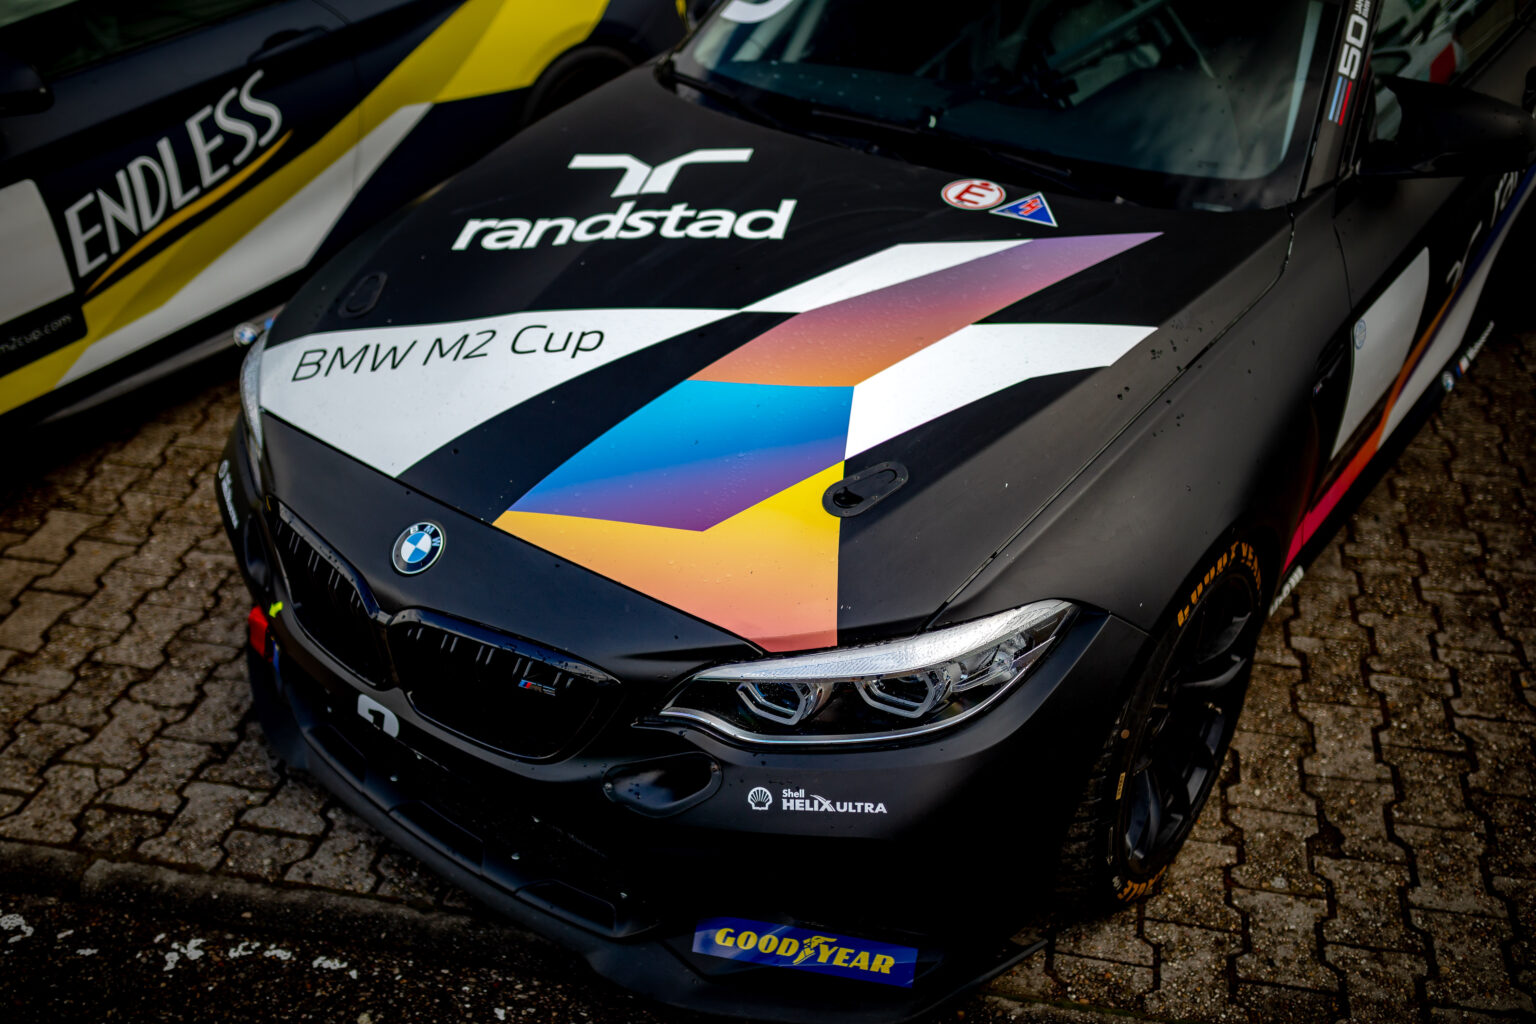 Real eye-catchers: the partners of the BMW M2 Cup